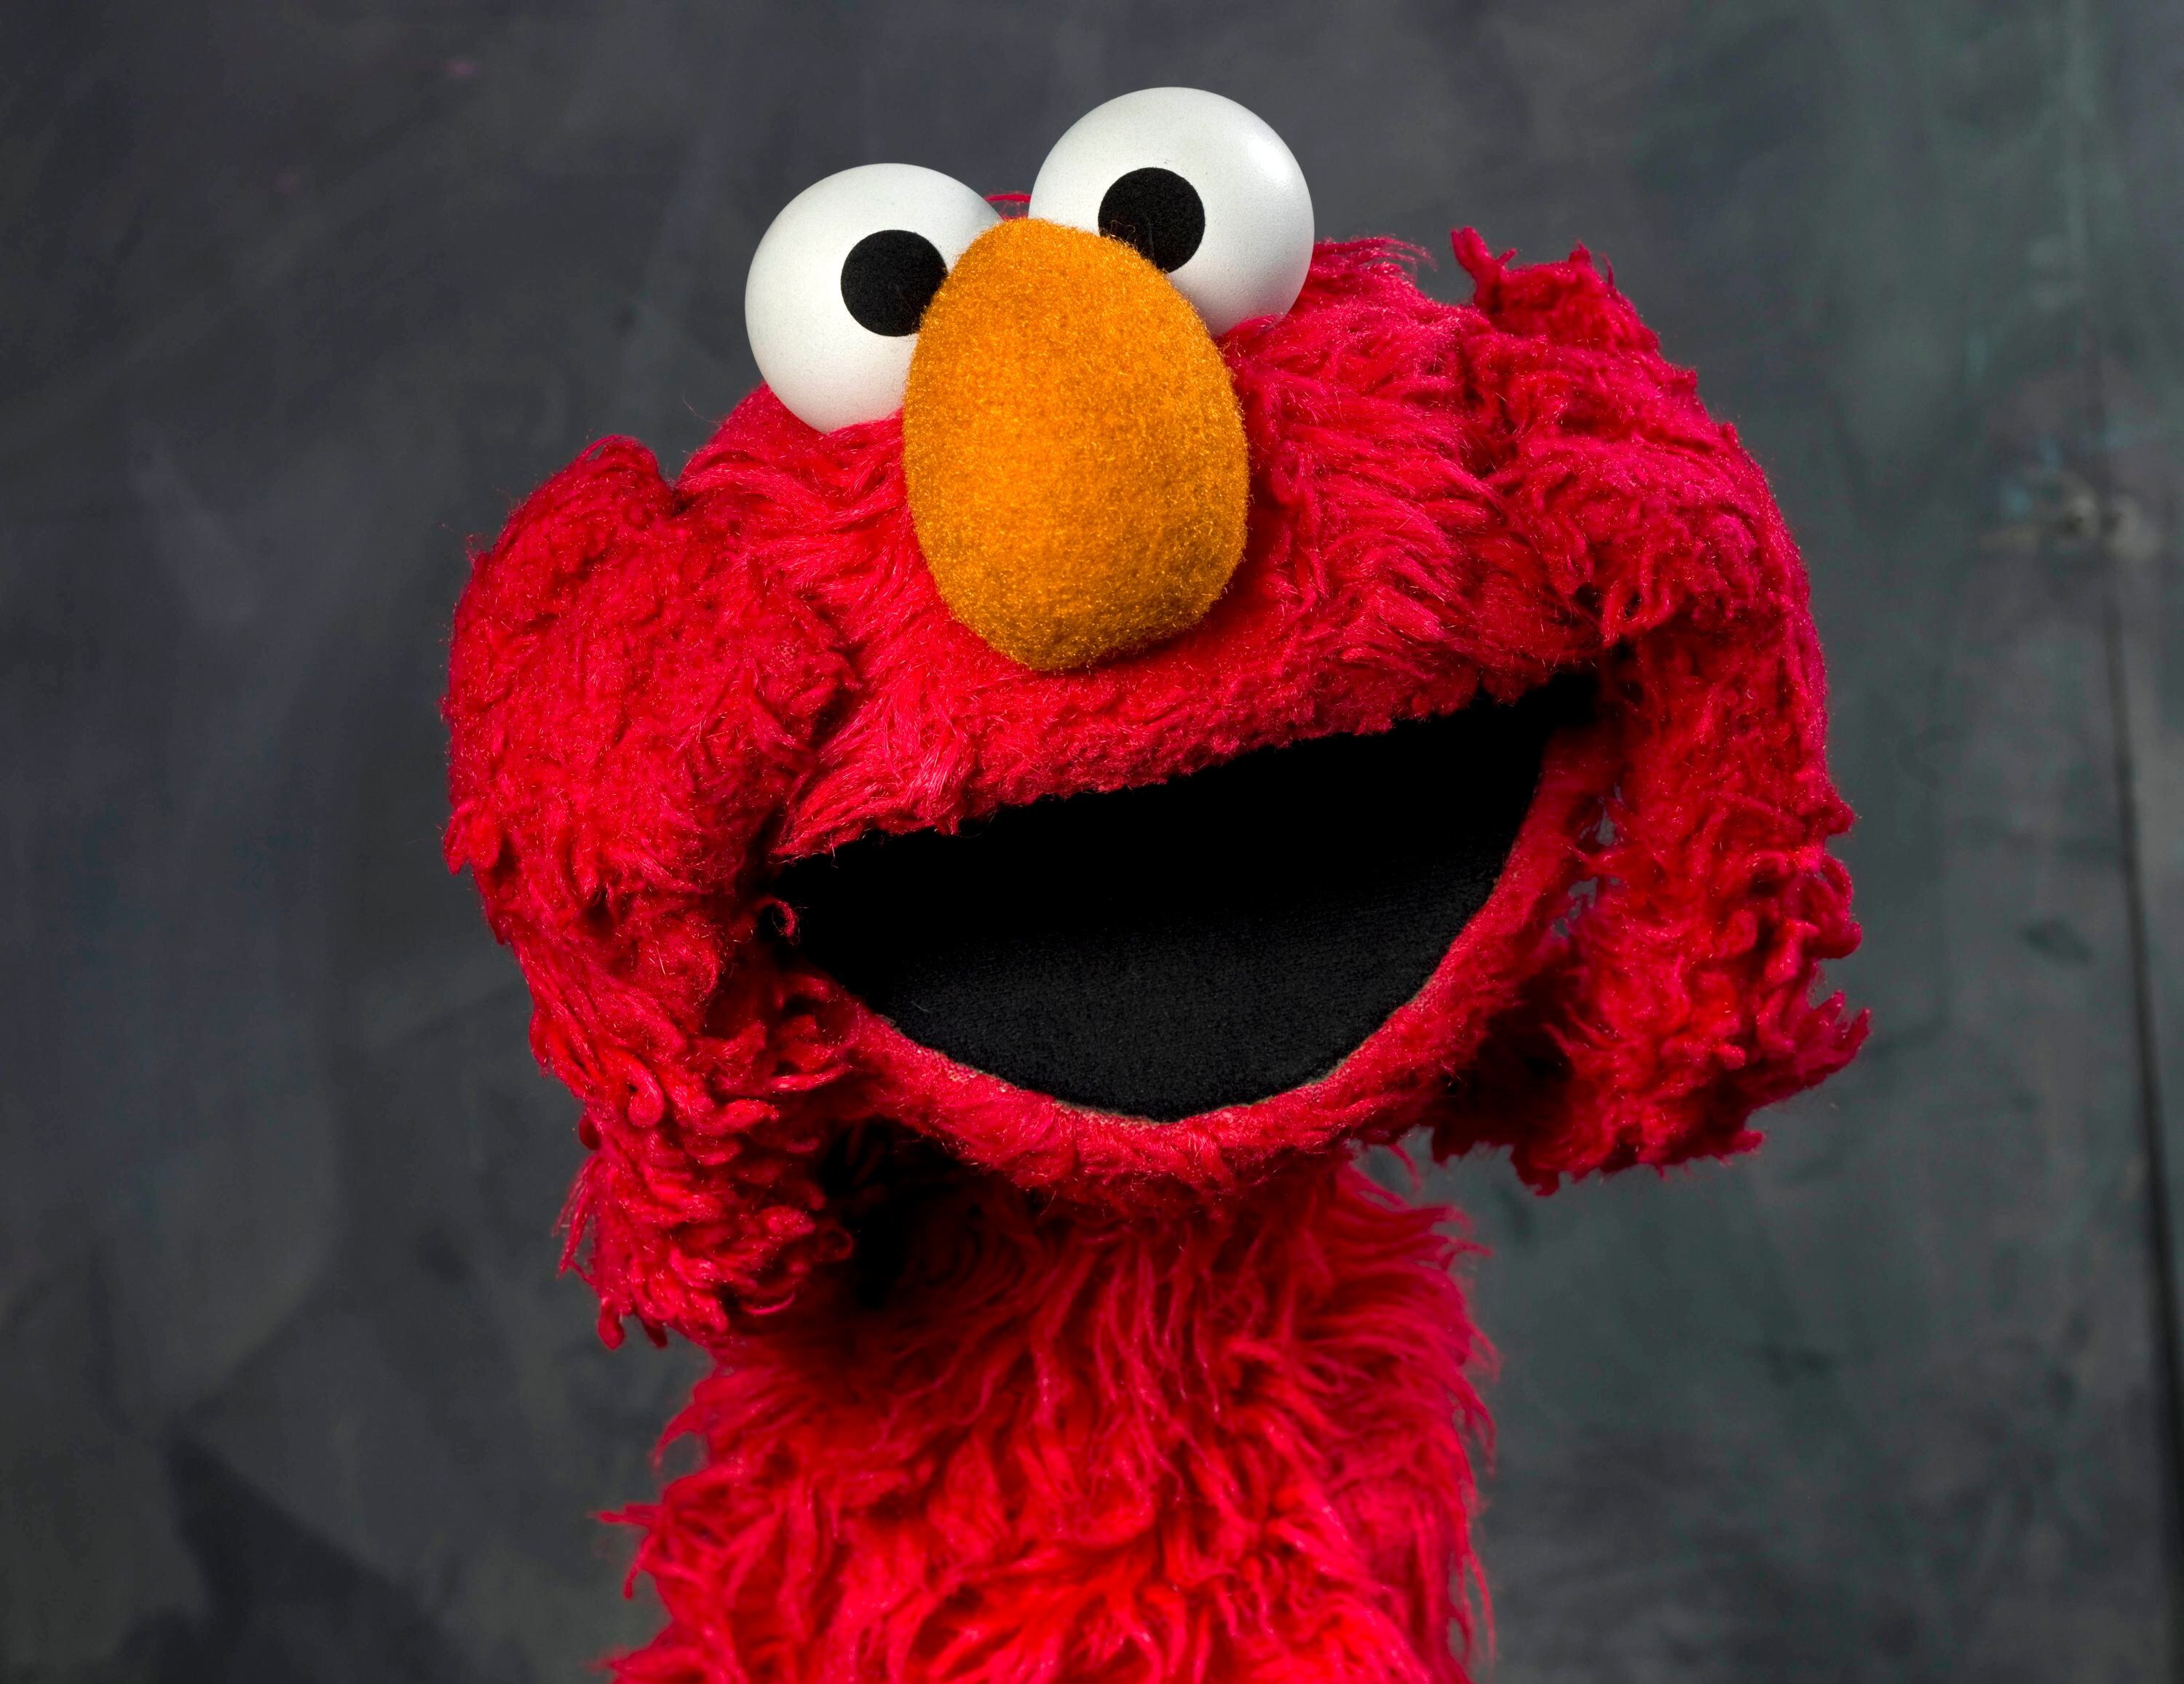 Elmo, 3, joins youngest Americans in getting vaccinated